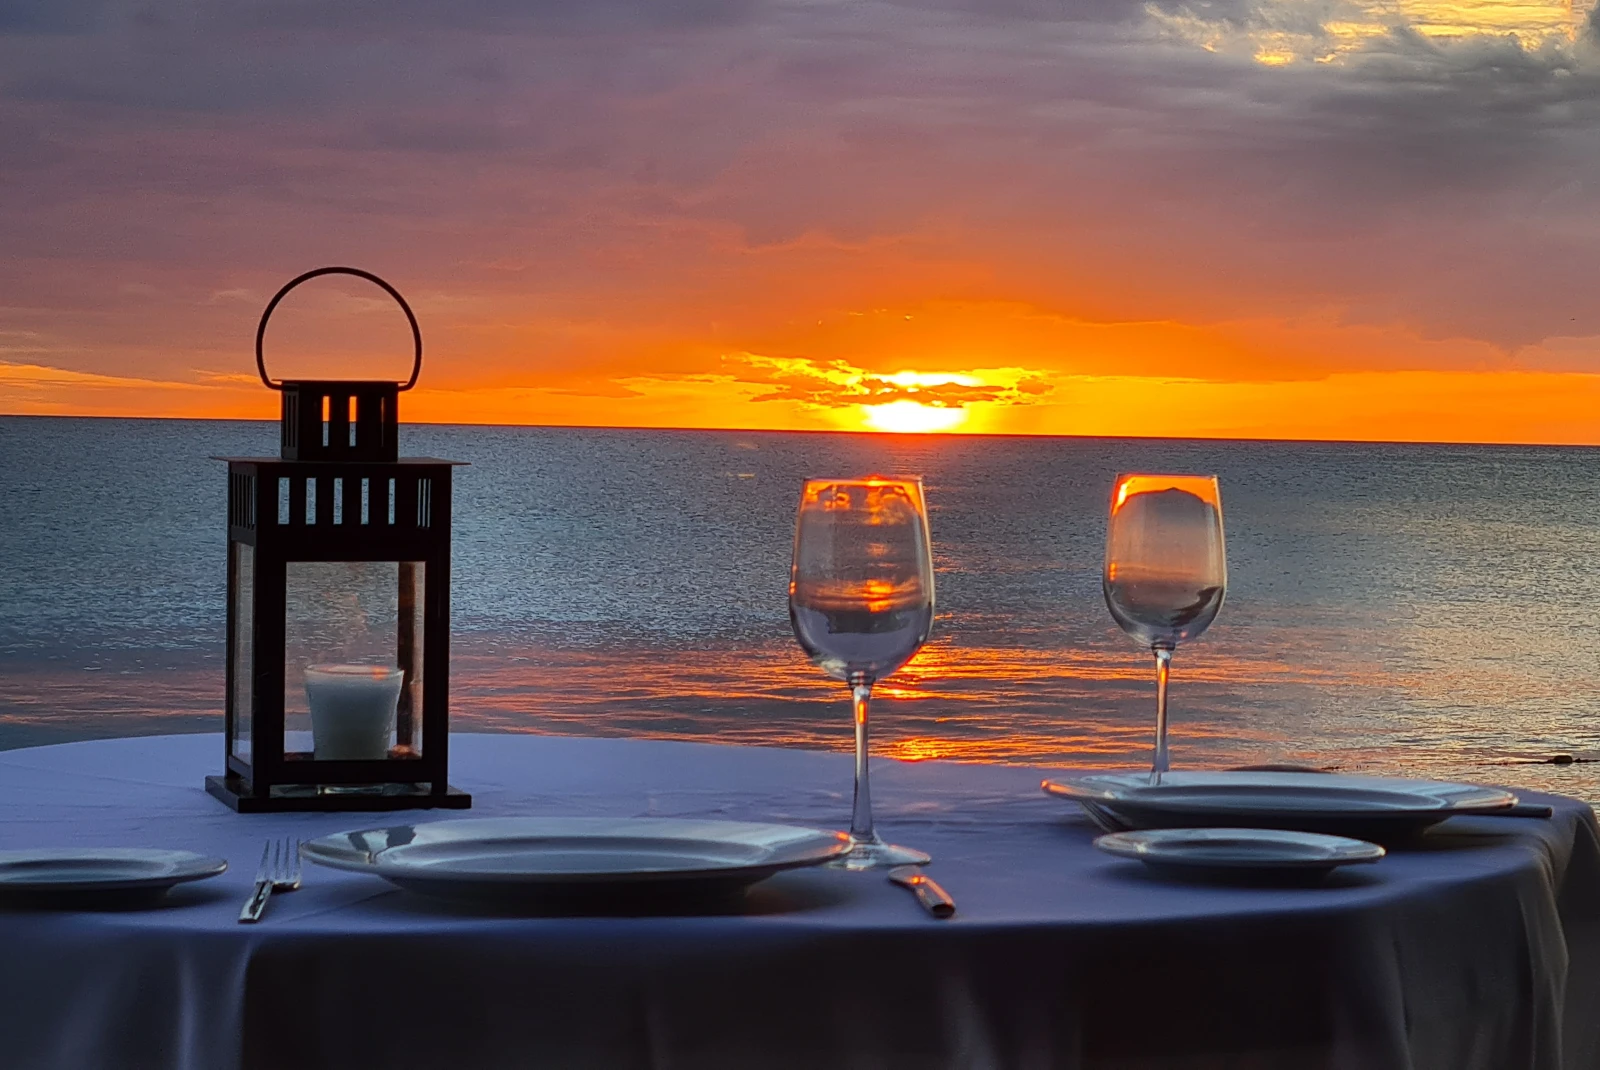 Two wine glasses sit on a table with a blue table cloth overlooking the ocean at sunset